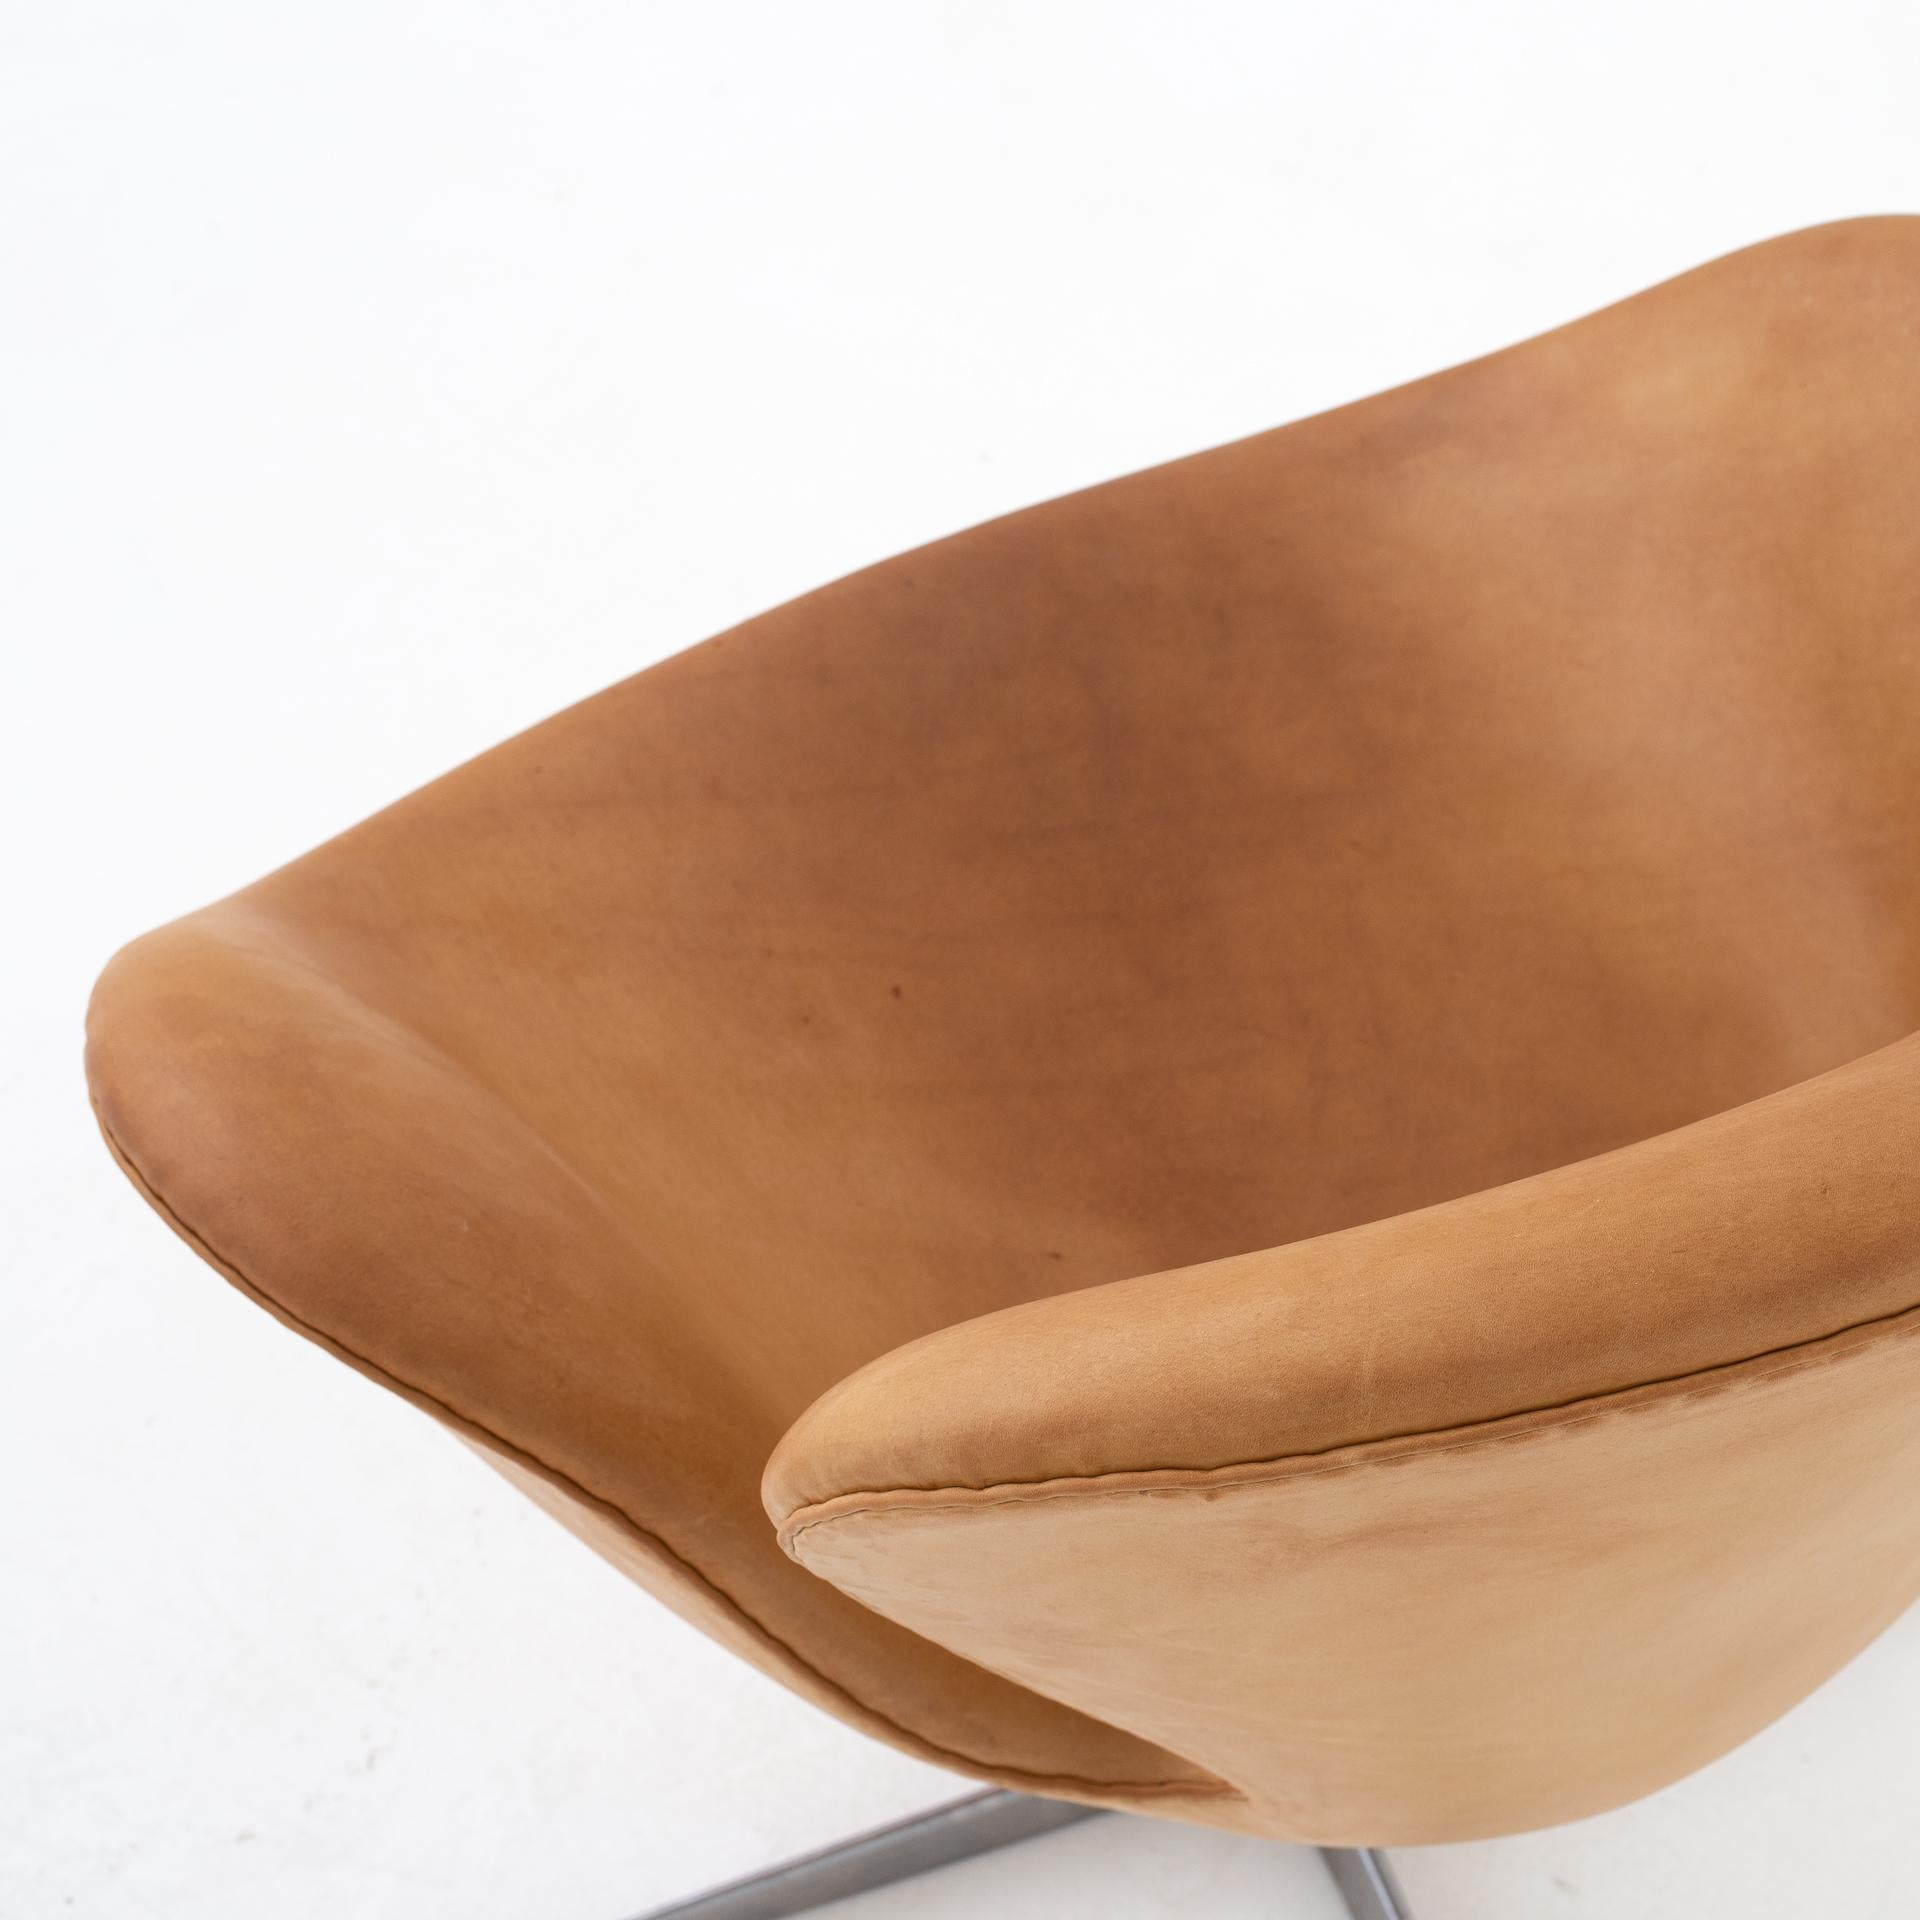 Patinated The Swan Chair by Arne Jacobsen